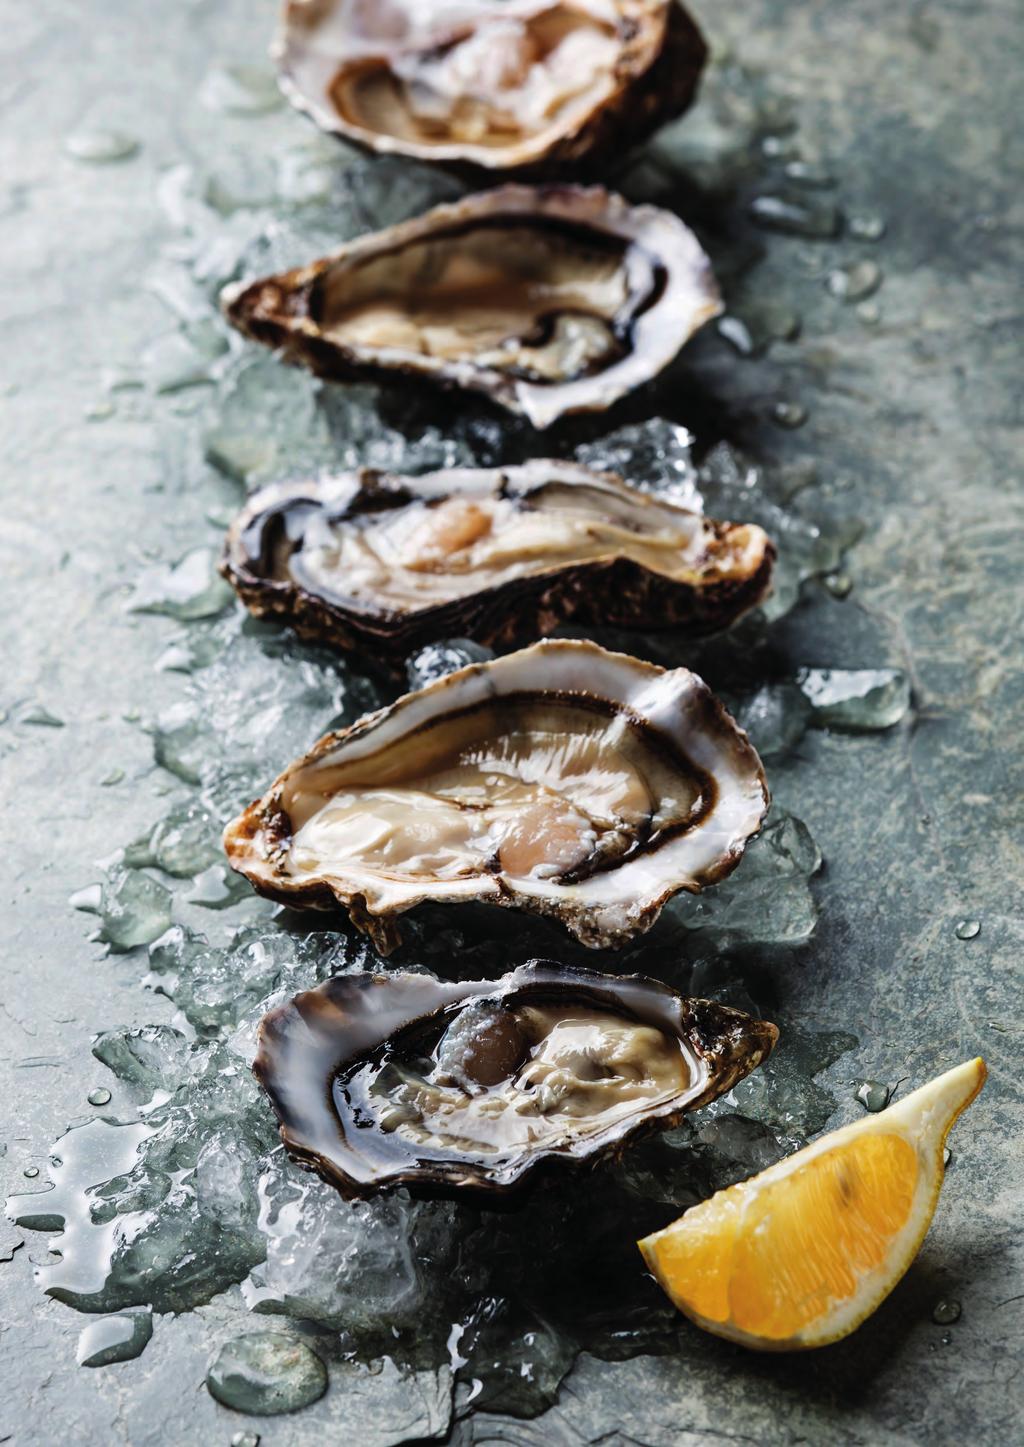 THE WORLD IS OUR OYSTER We have the great Scottish Highlands to thank for our exceptional Loch Fyne oysters.